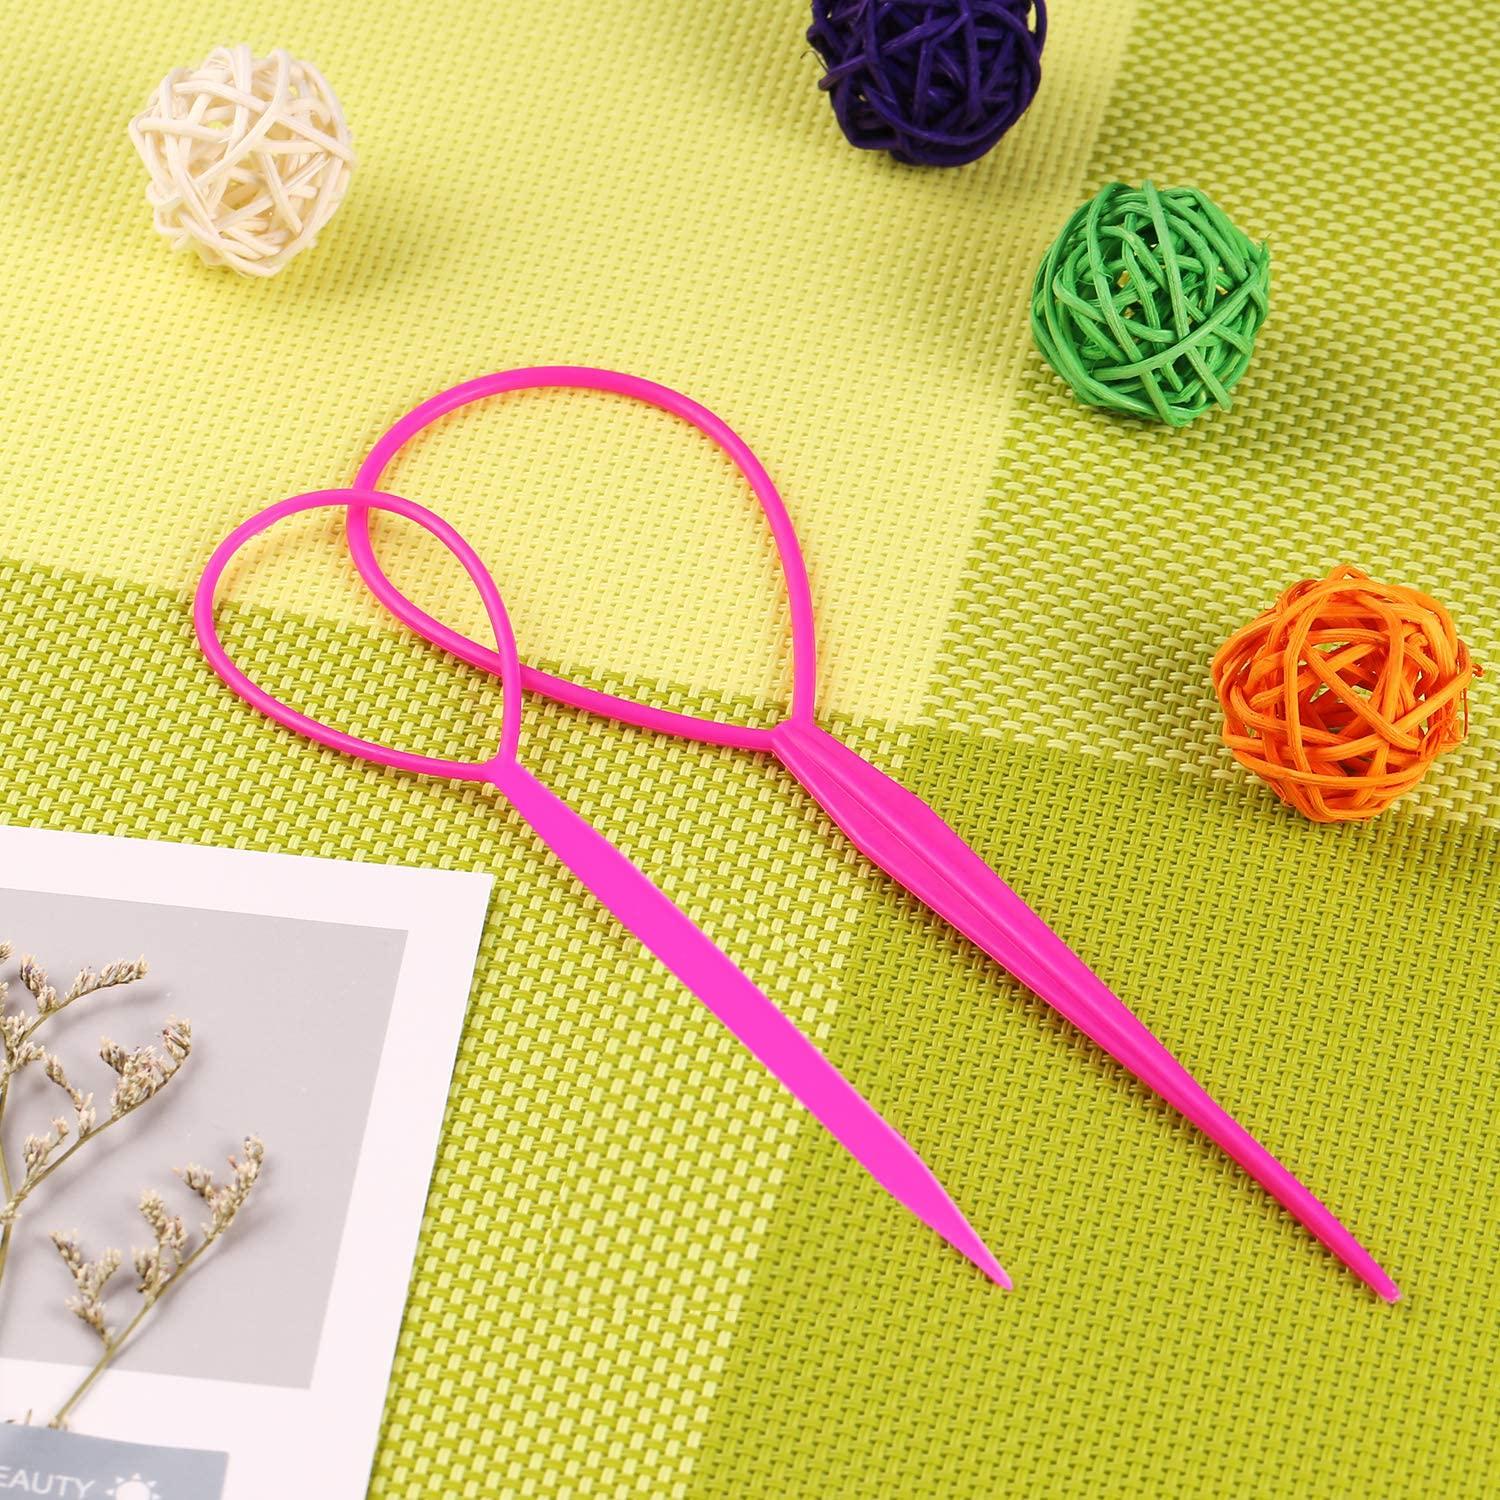 WSYUB 10Pcs Topsy Tail Tools, Hair Tools Braid Accessories Ponytail Maker  for Girs, French Braid Tool Loop for Hair Styling, 5 Colors